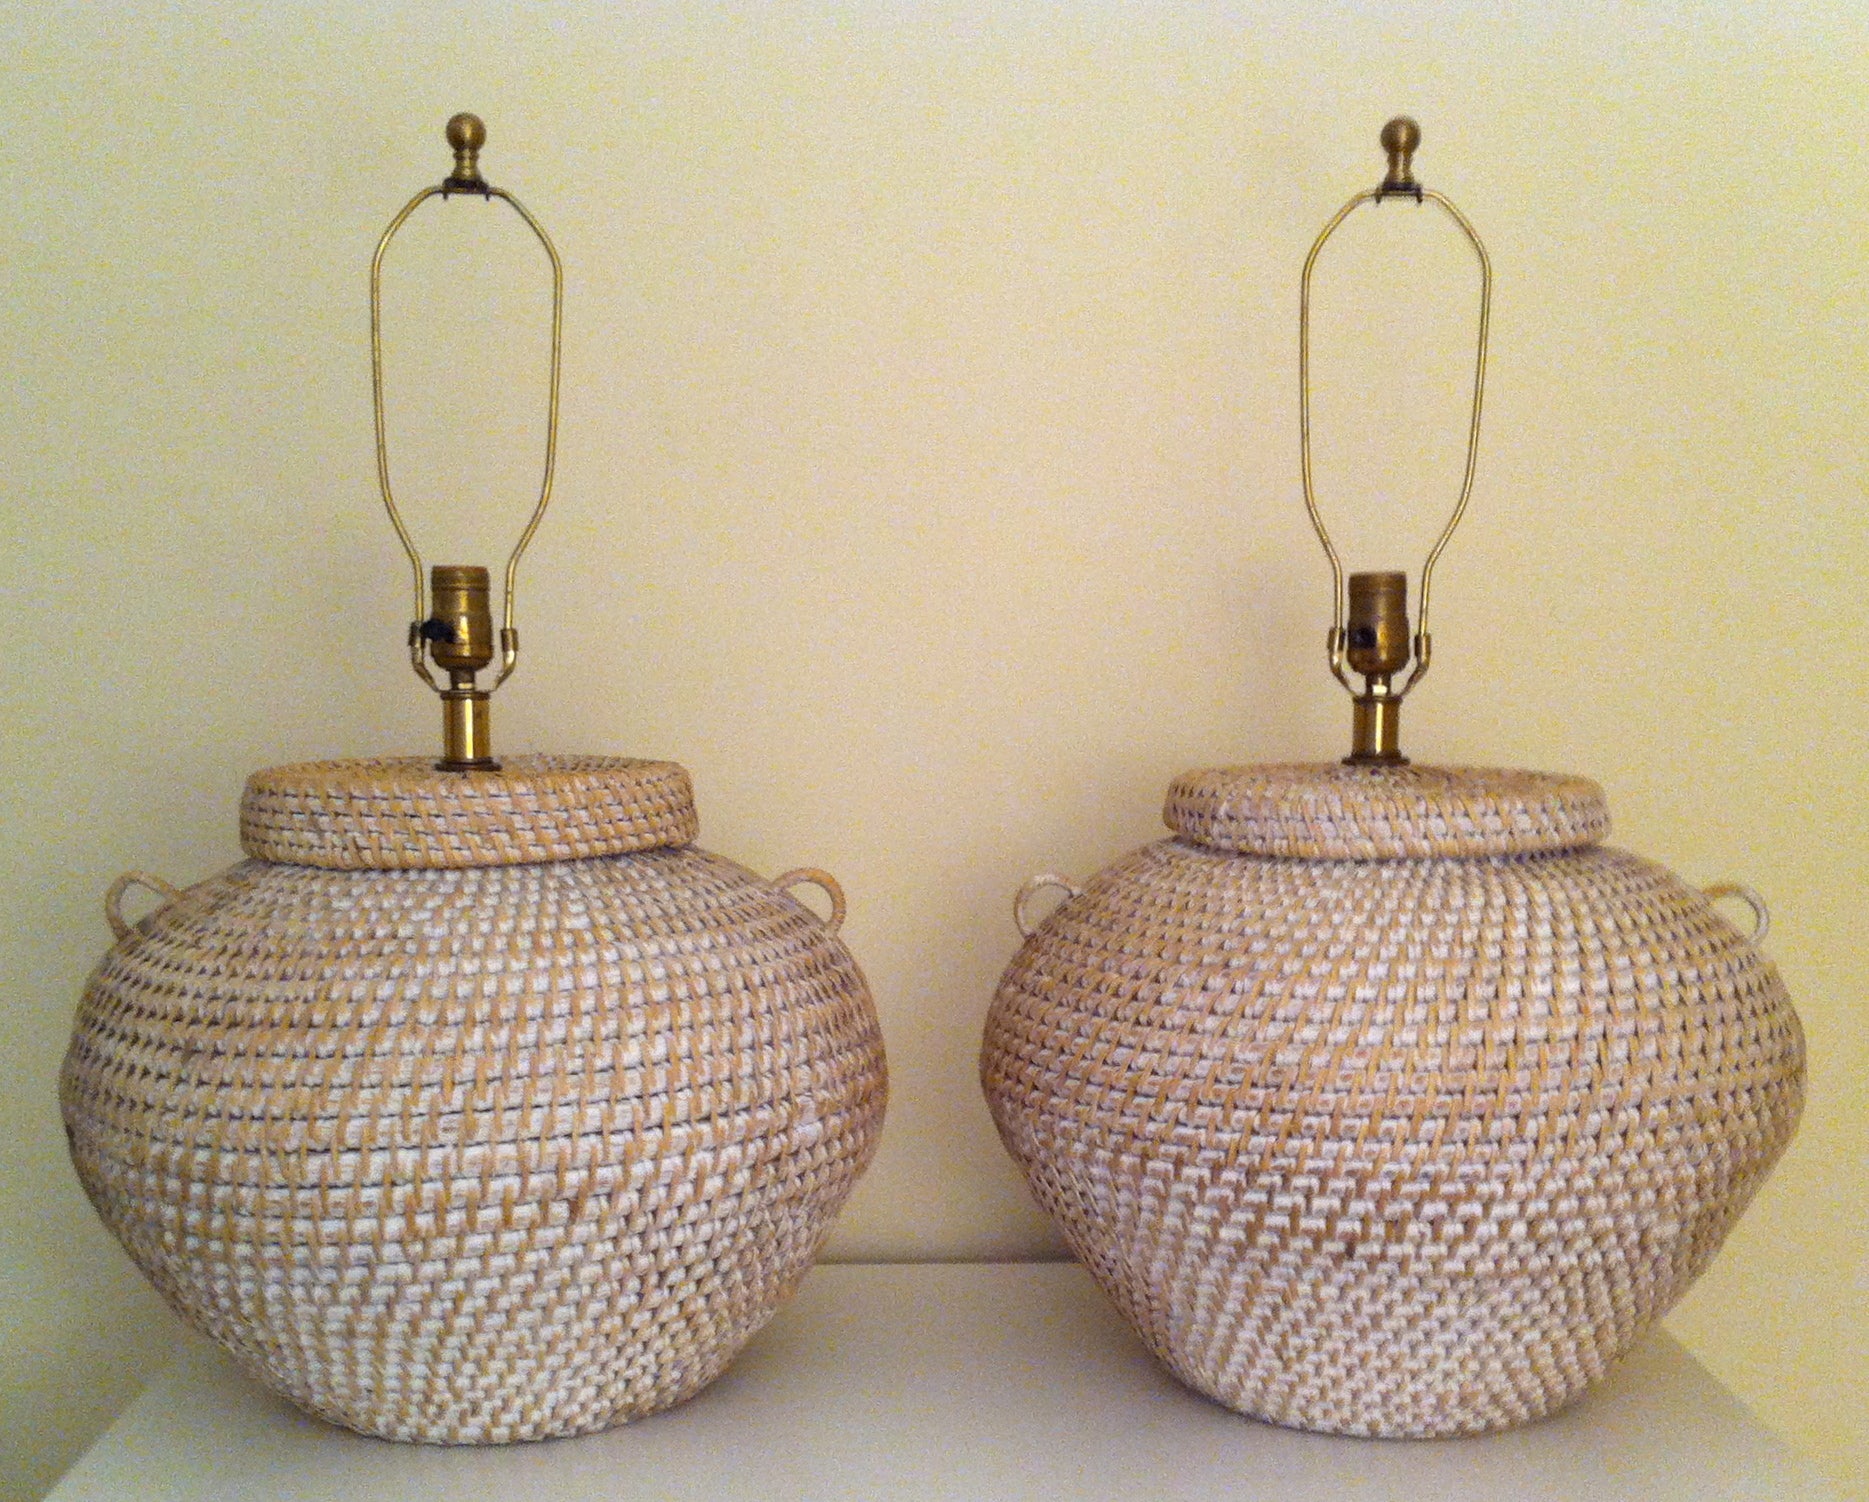 Pair of Mid-Century Modern Urn Form Woven Basket Table Lamps